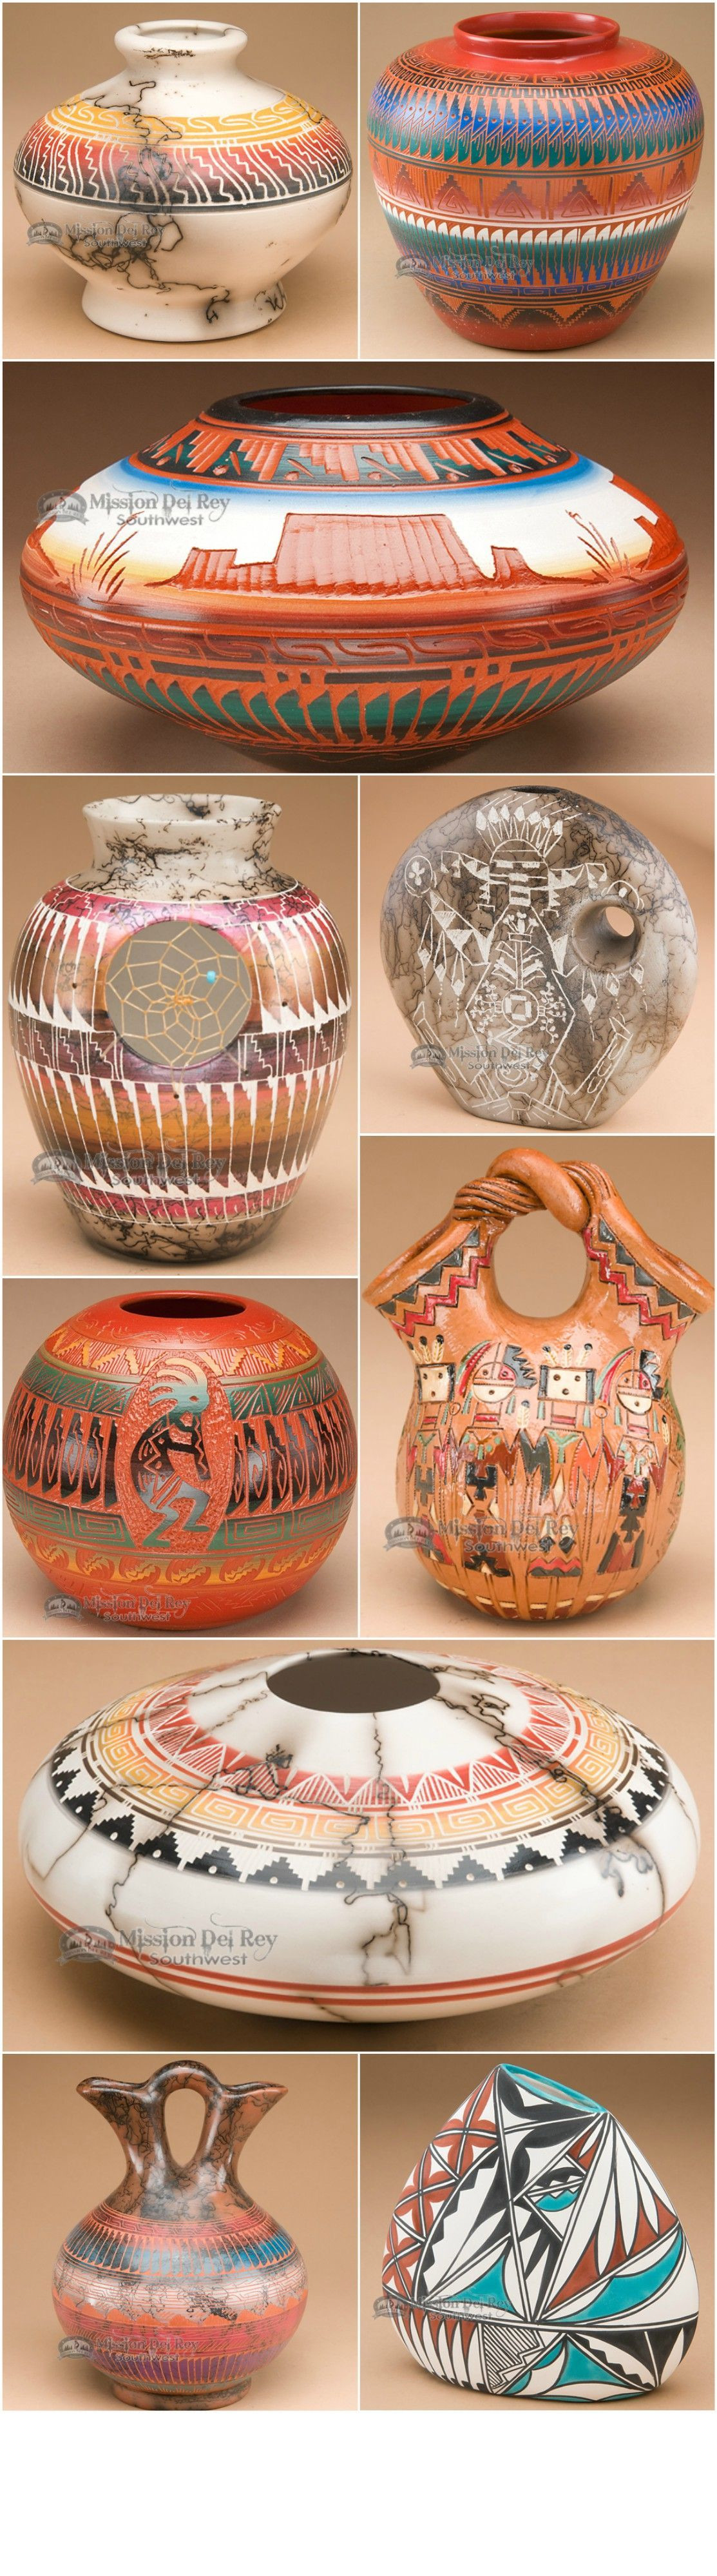 vase market coupon code of 26 vase market coupon the weekly world regarding american indian pottery is very popular among collectors of